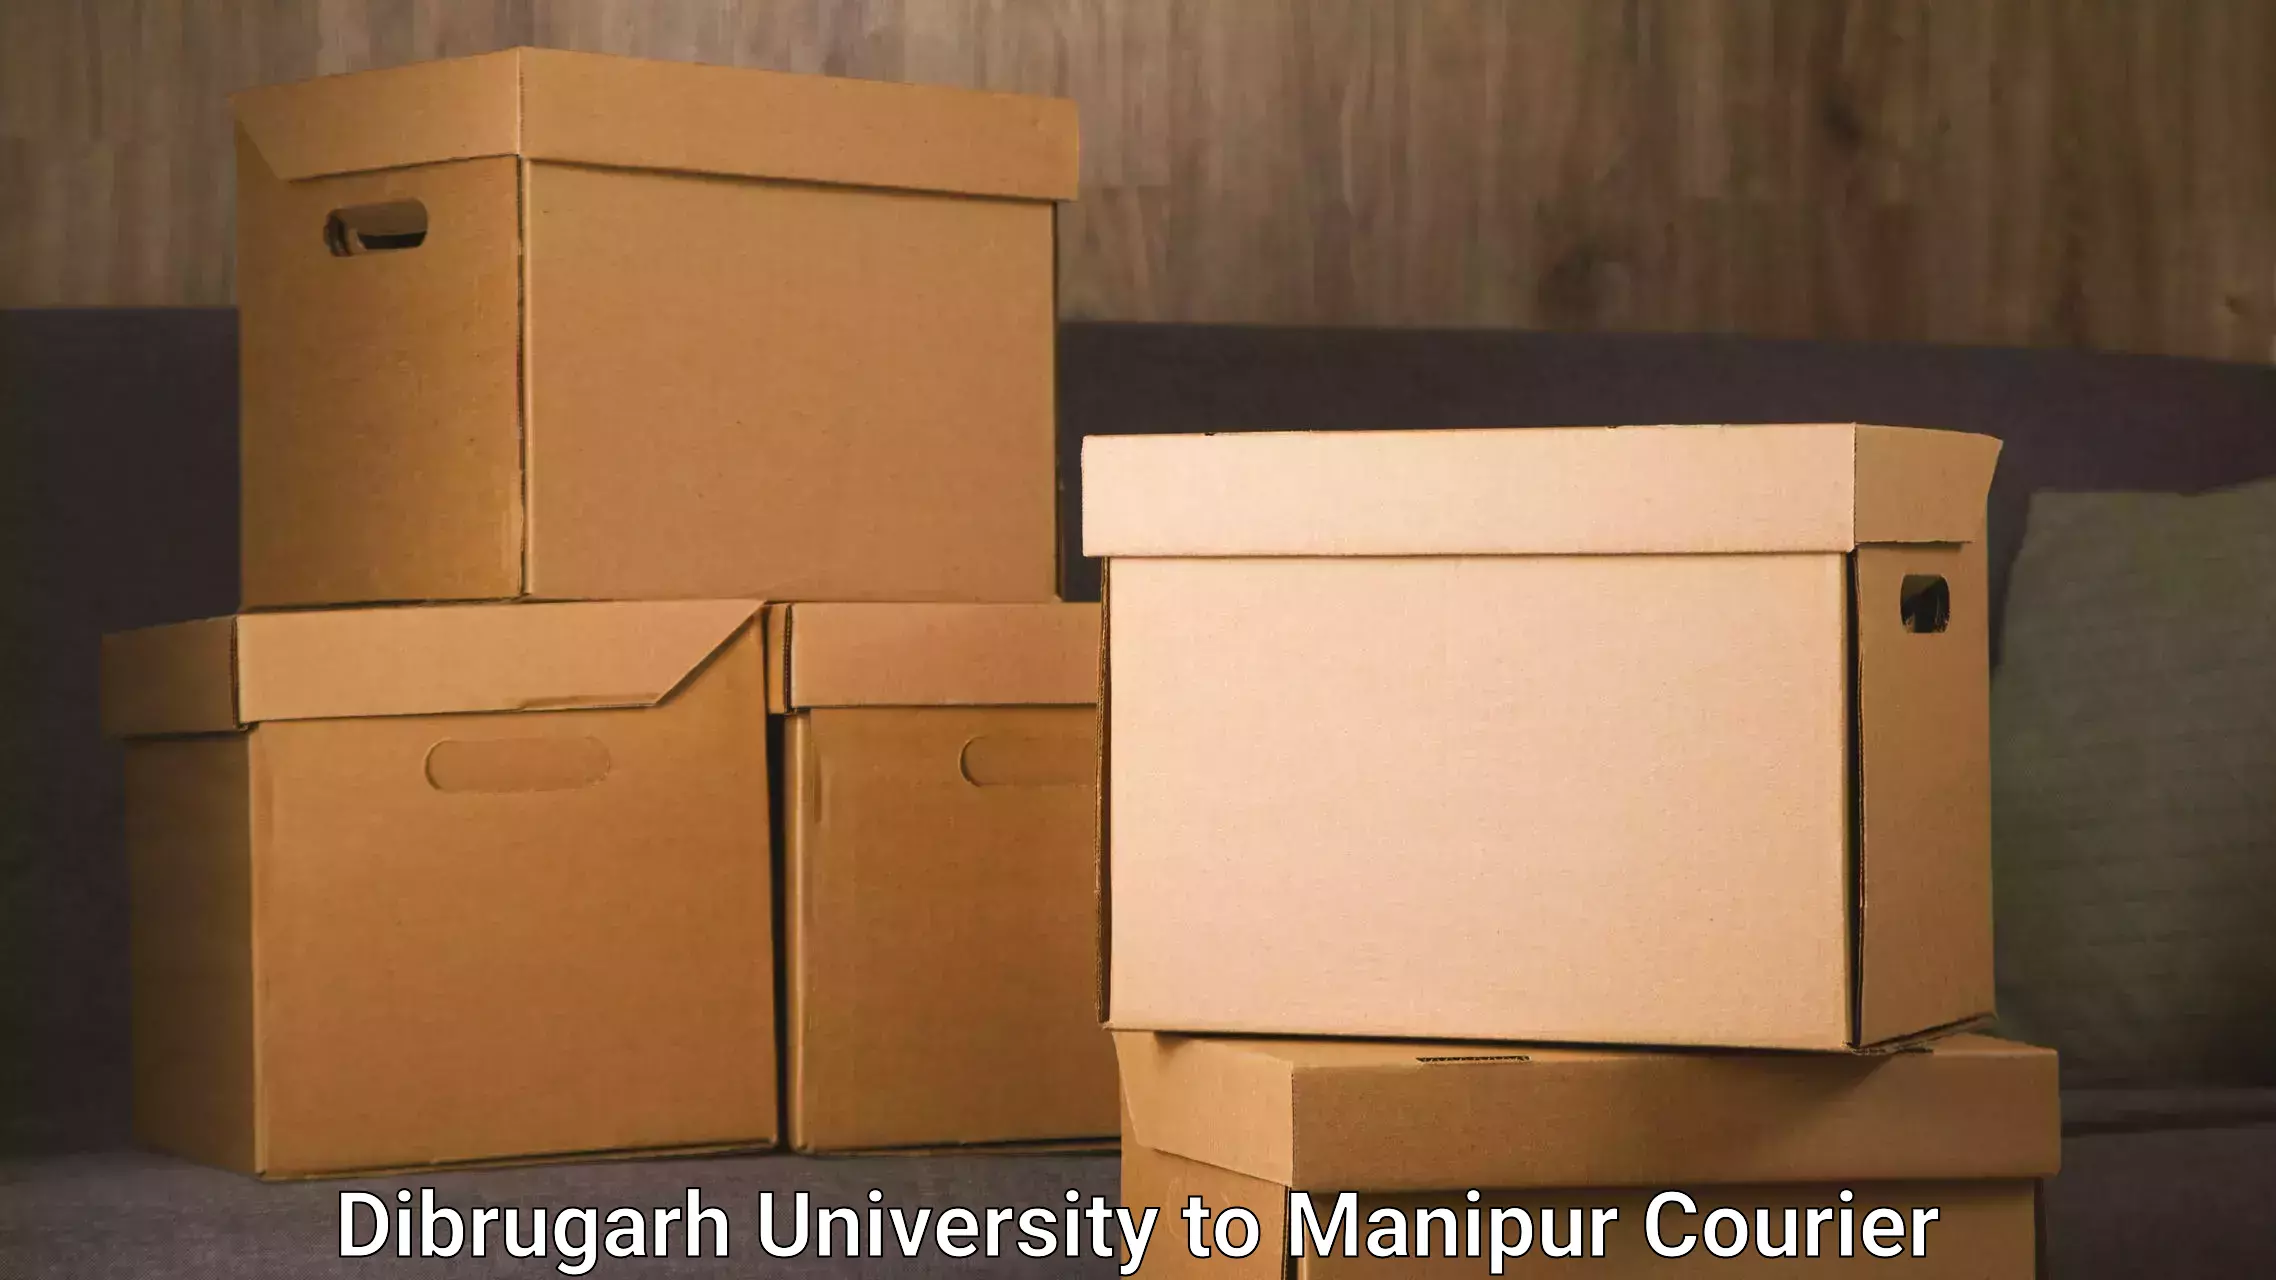 Trackable shipping service Dibrugarh University to Imphal